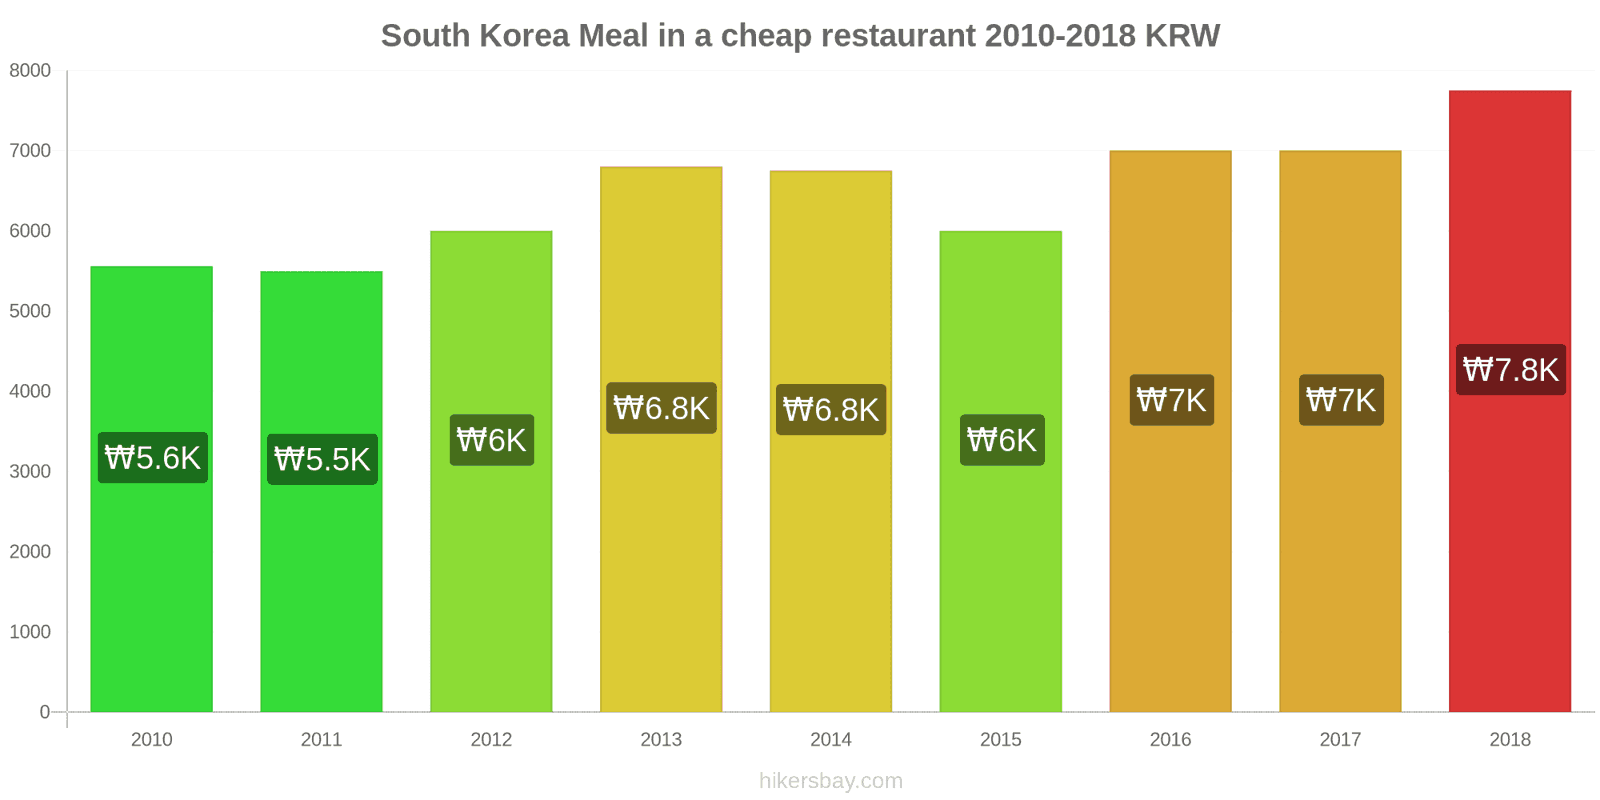 South Korea price changes Meal in a cheap restaurant hikersbay.com